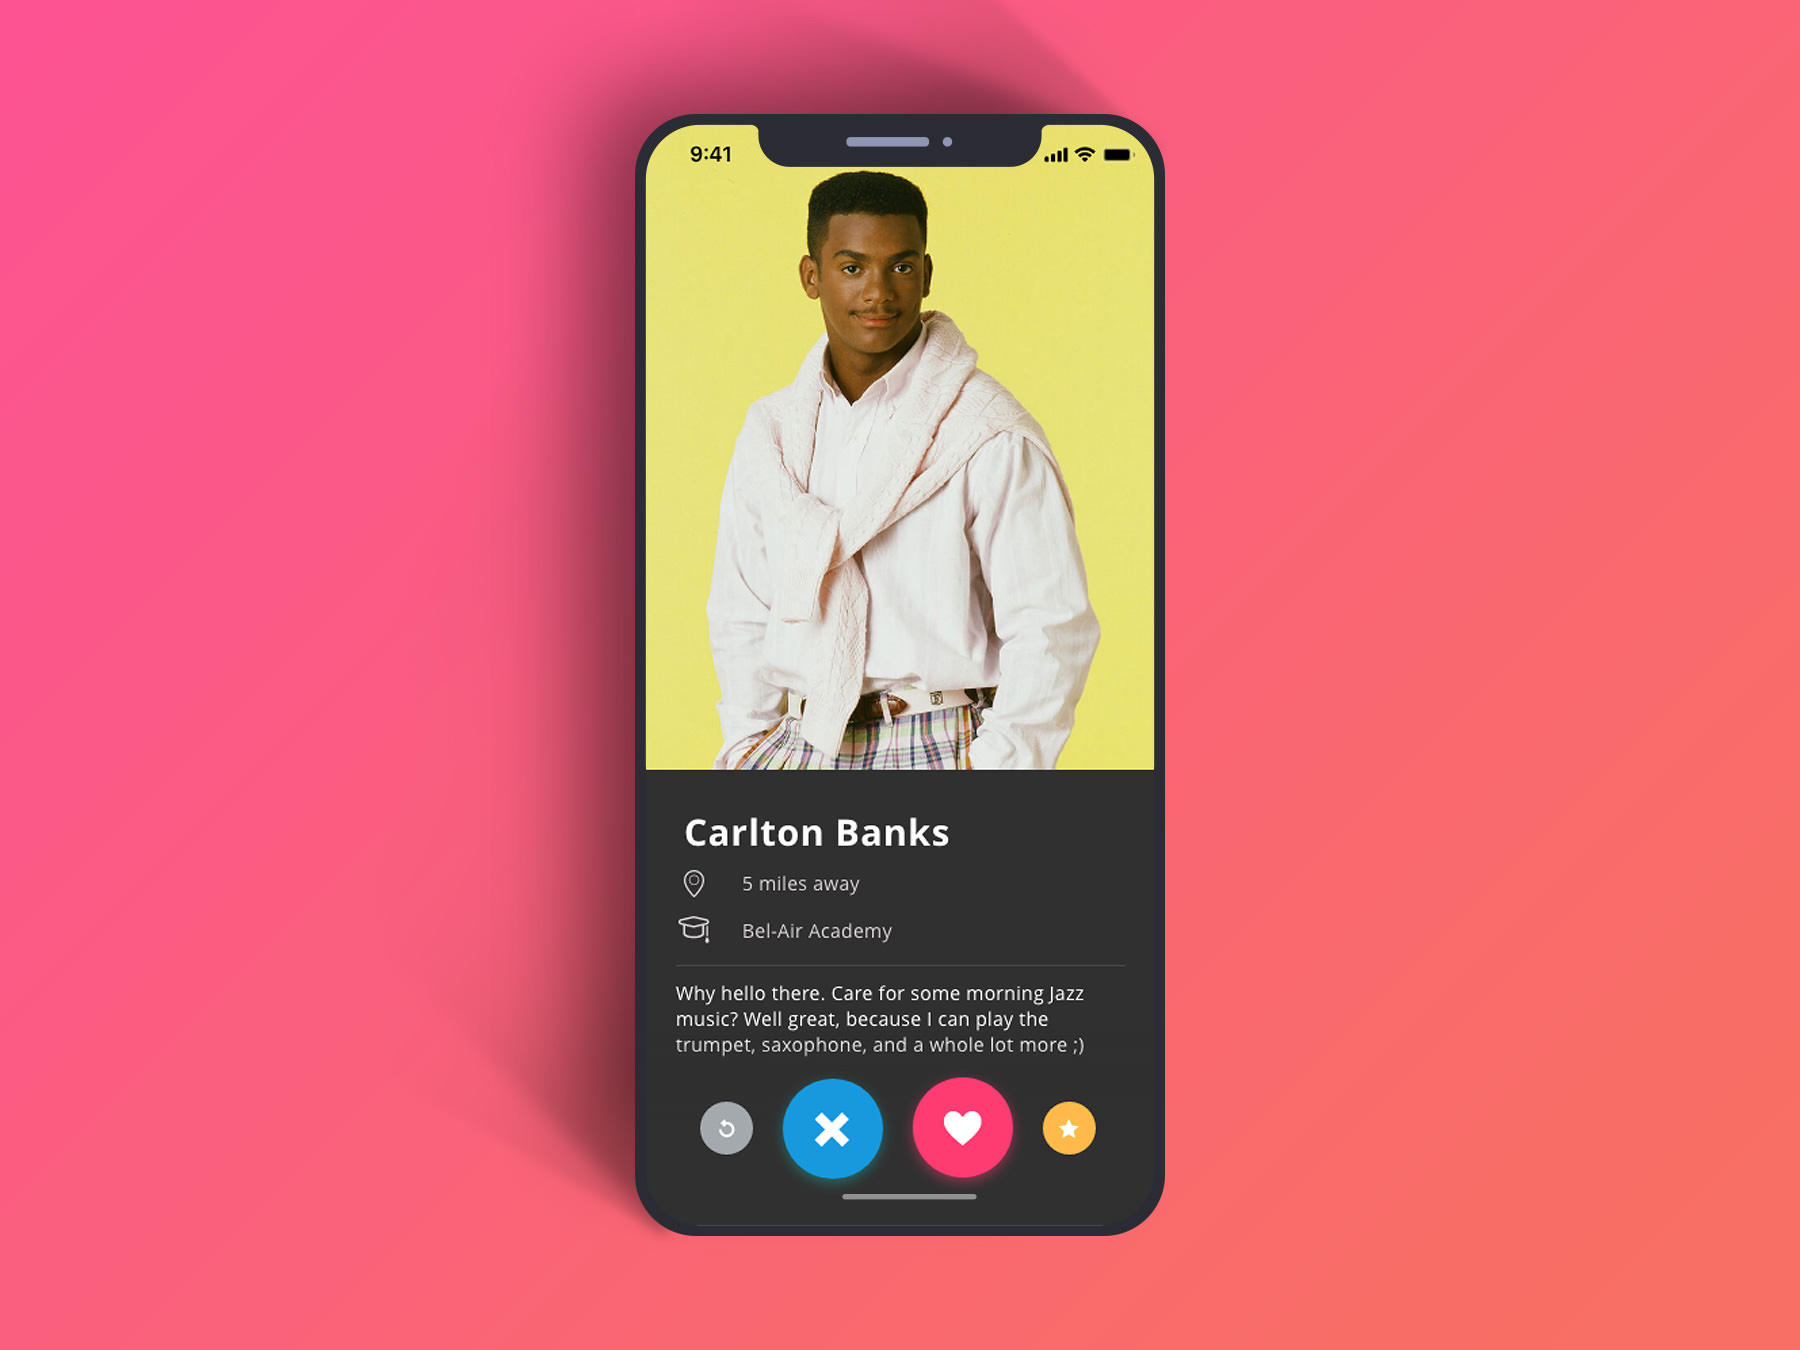 tinder iphone mockup for user profile for Carlton Banks from Fresh Prince of Bel Air for design challenge 006